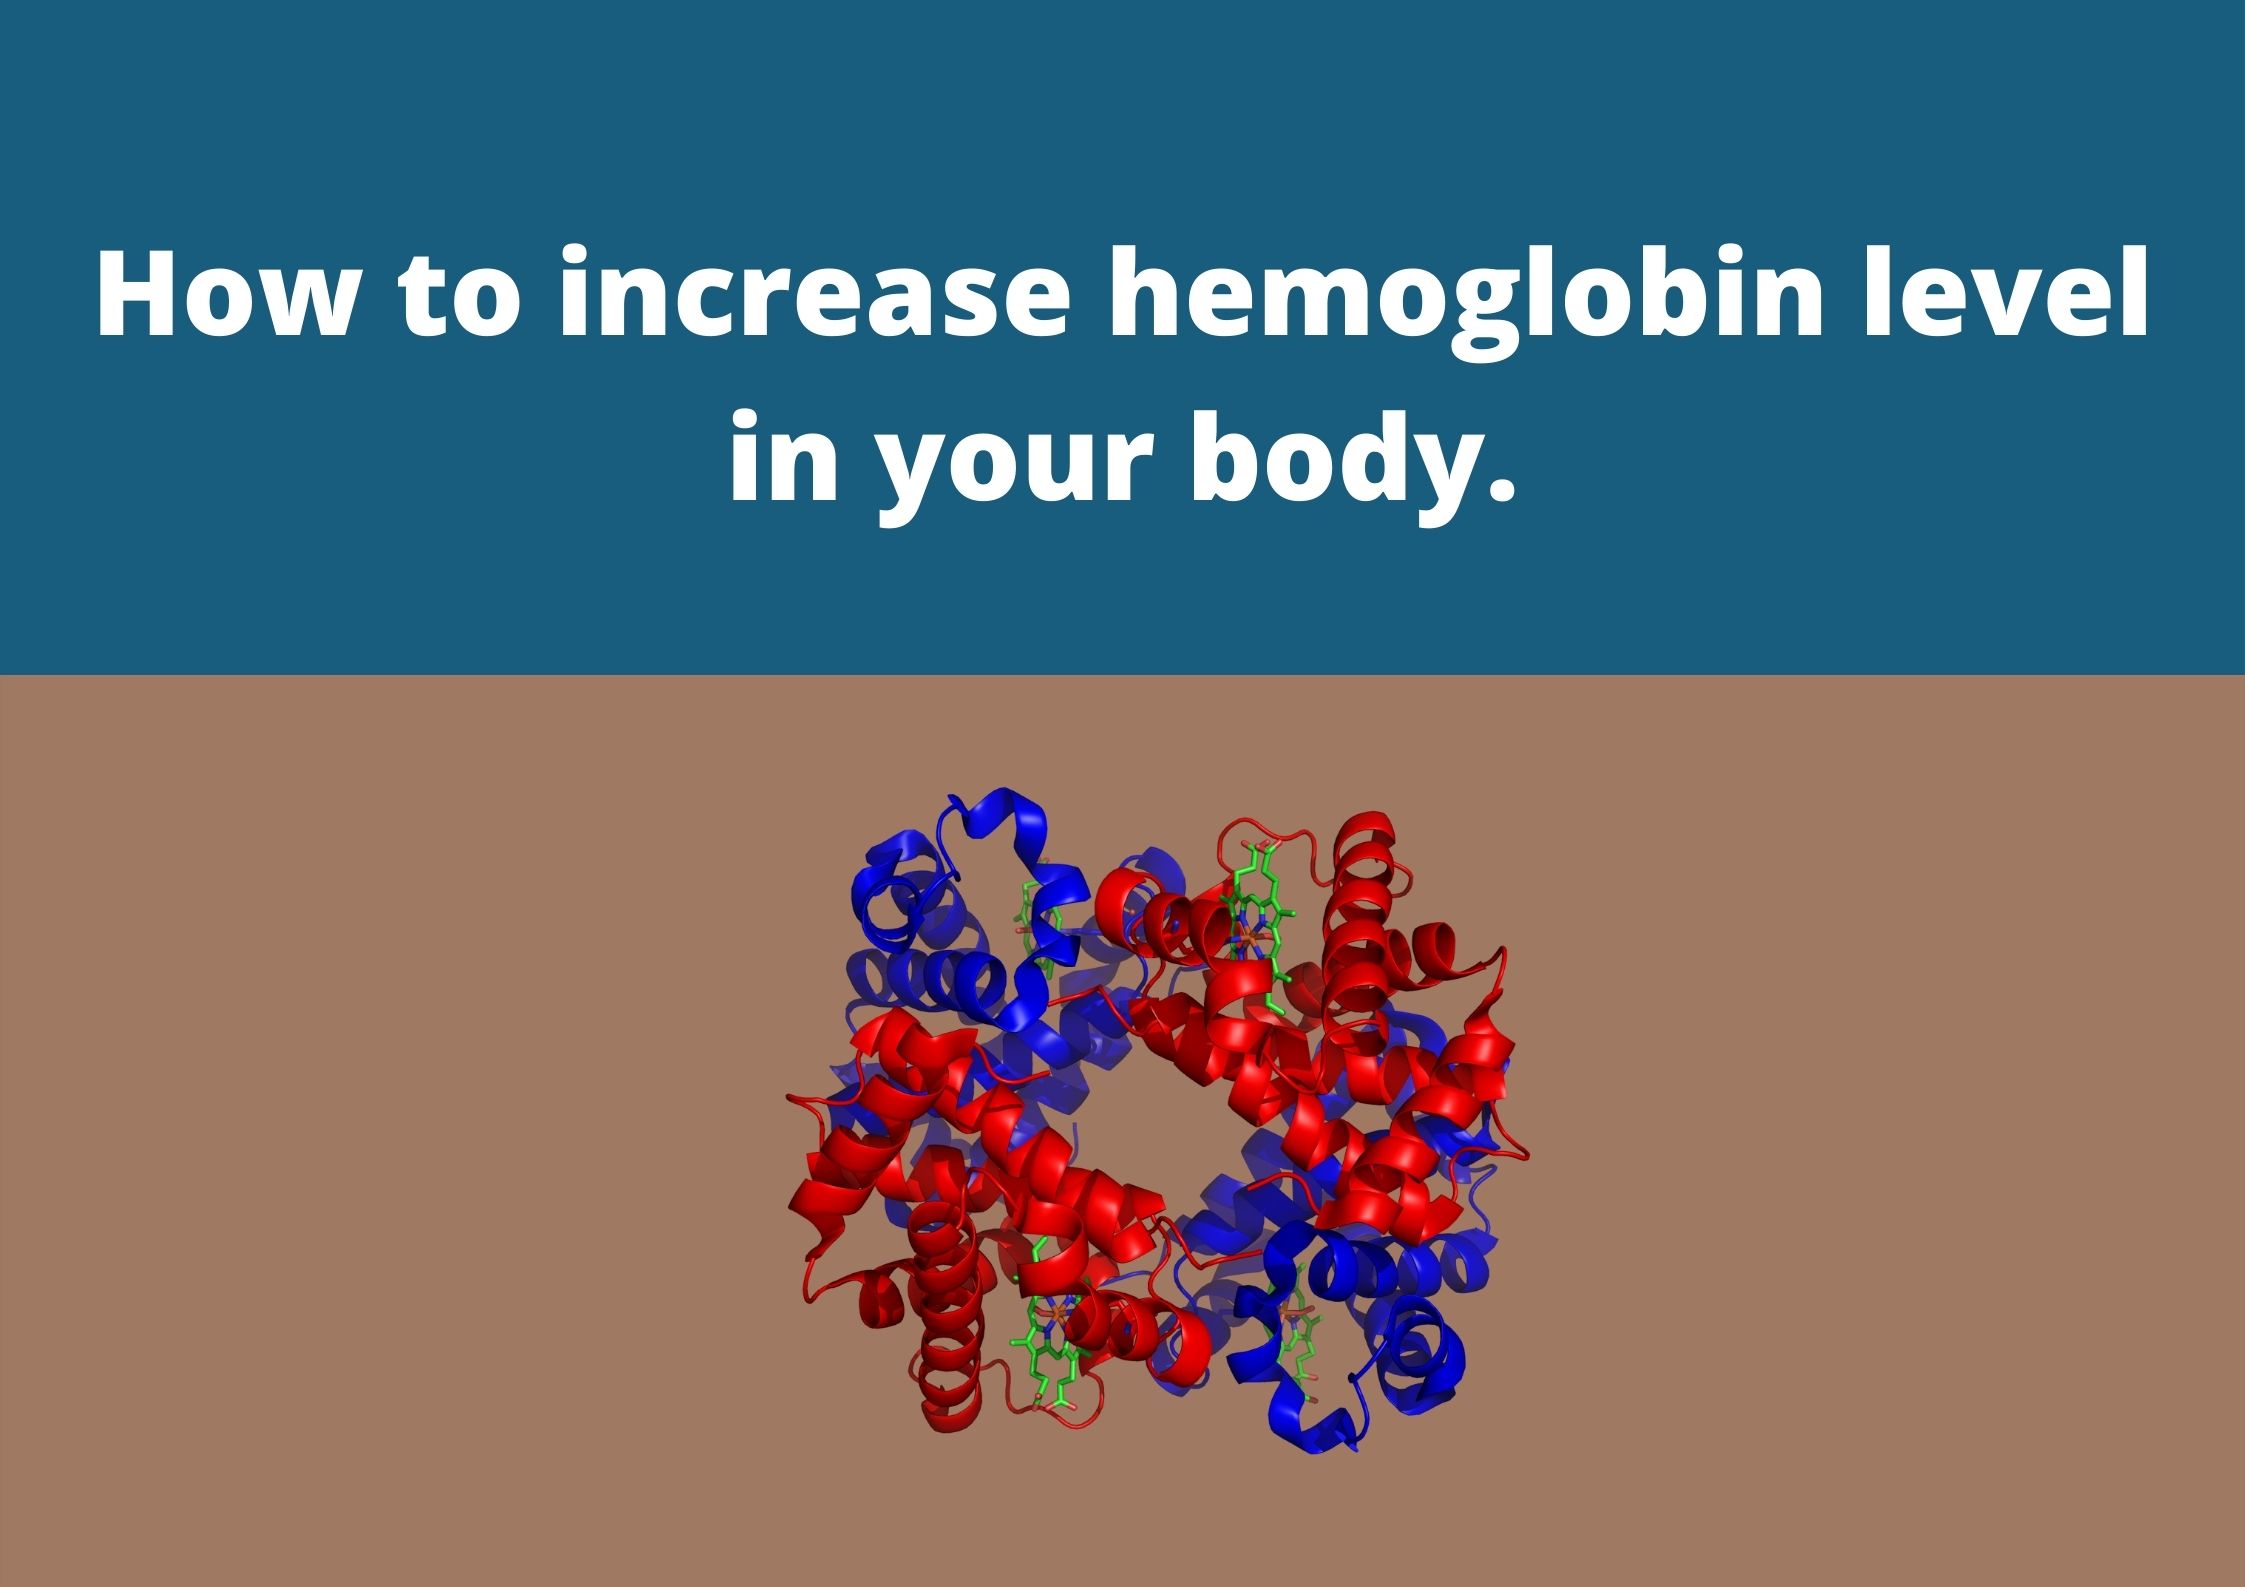 How to increase hemoglobin level in your body